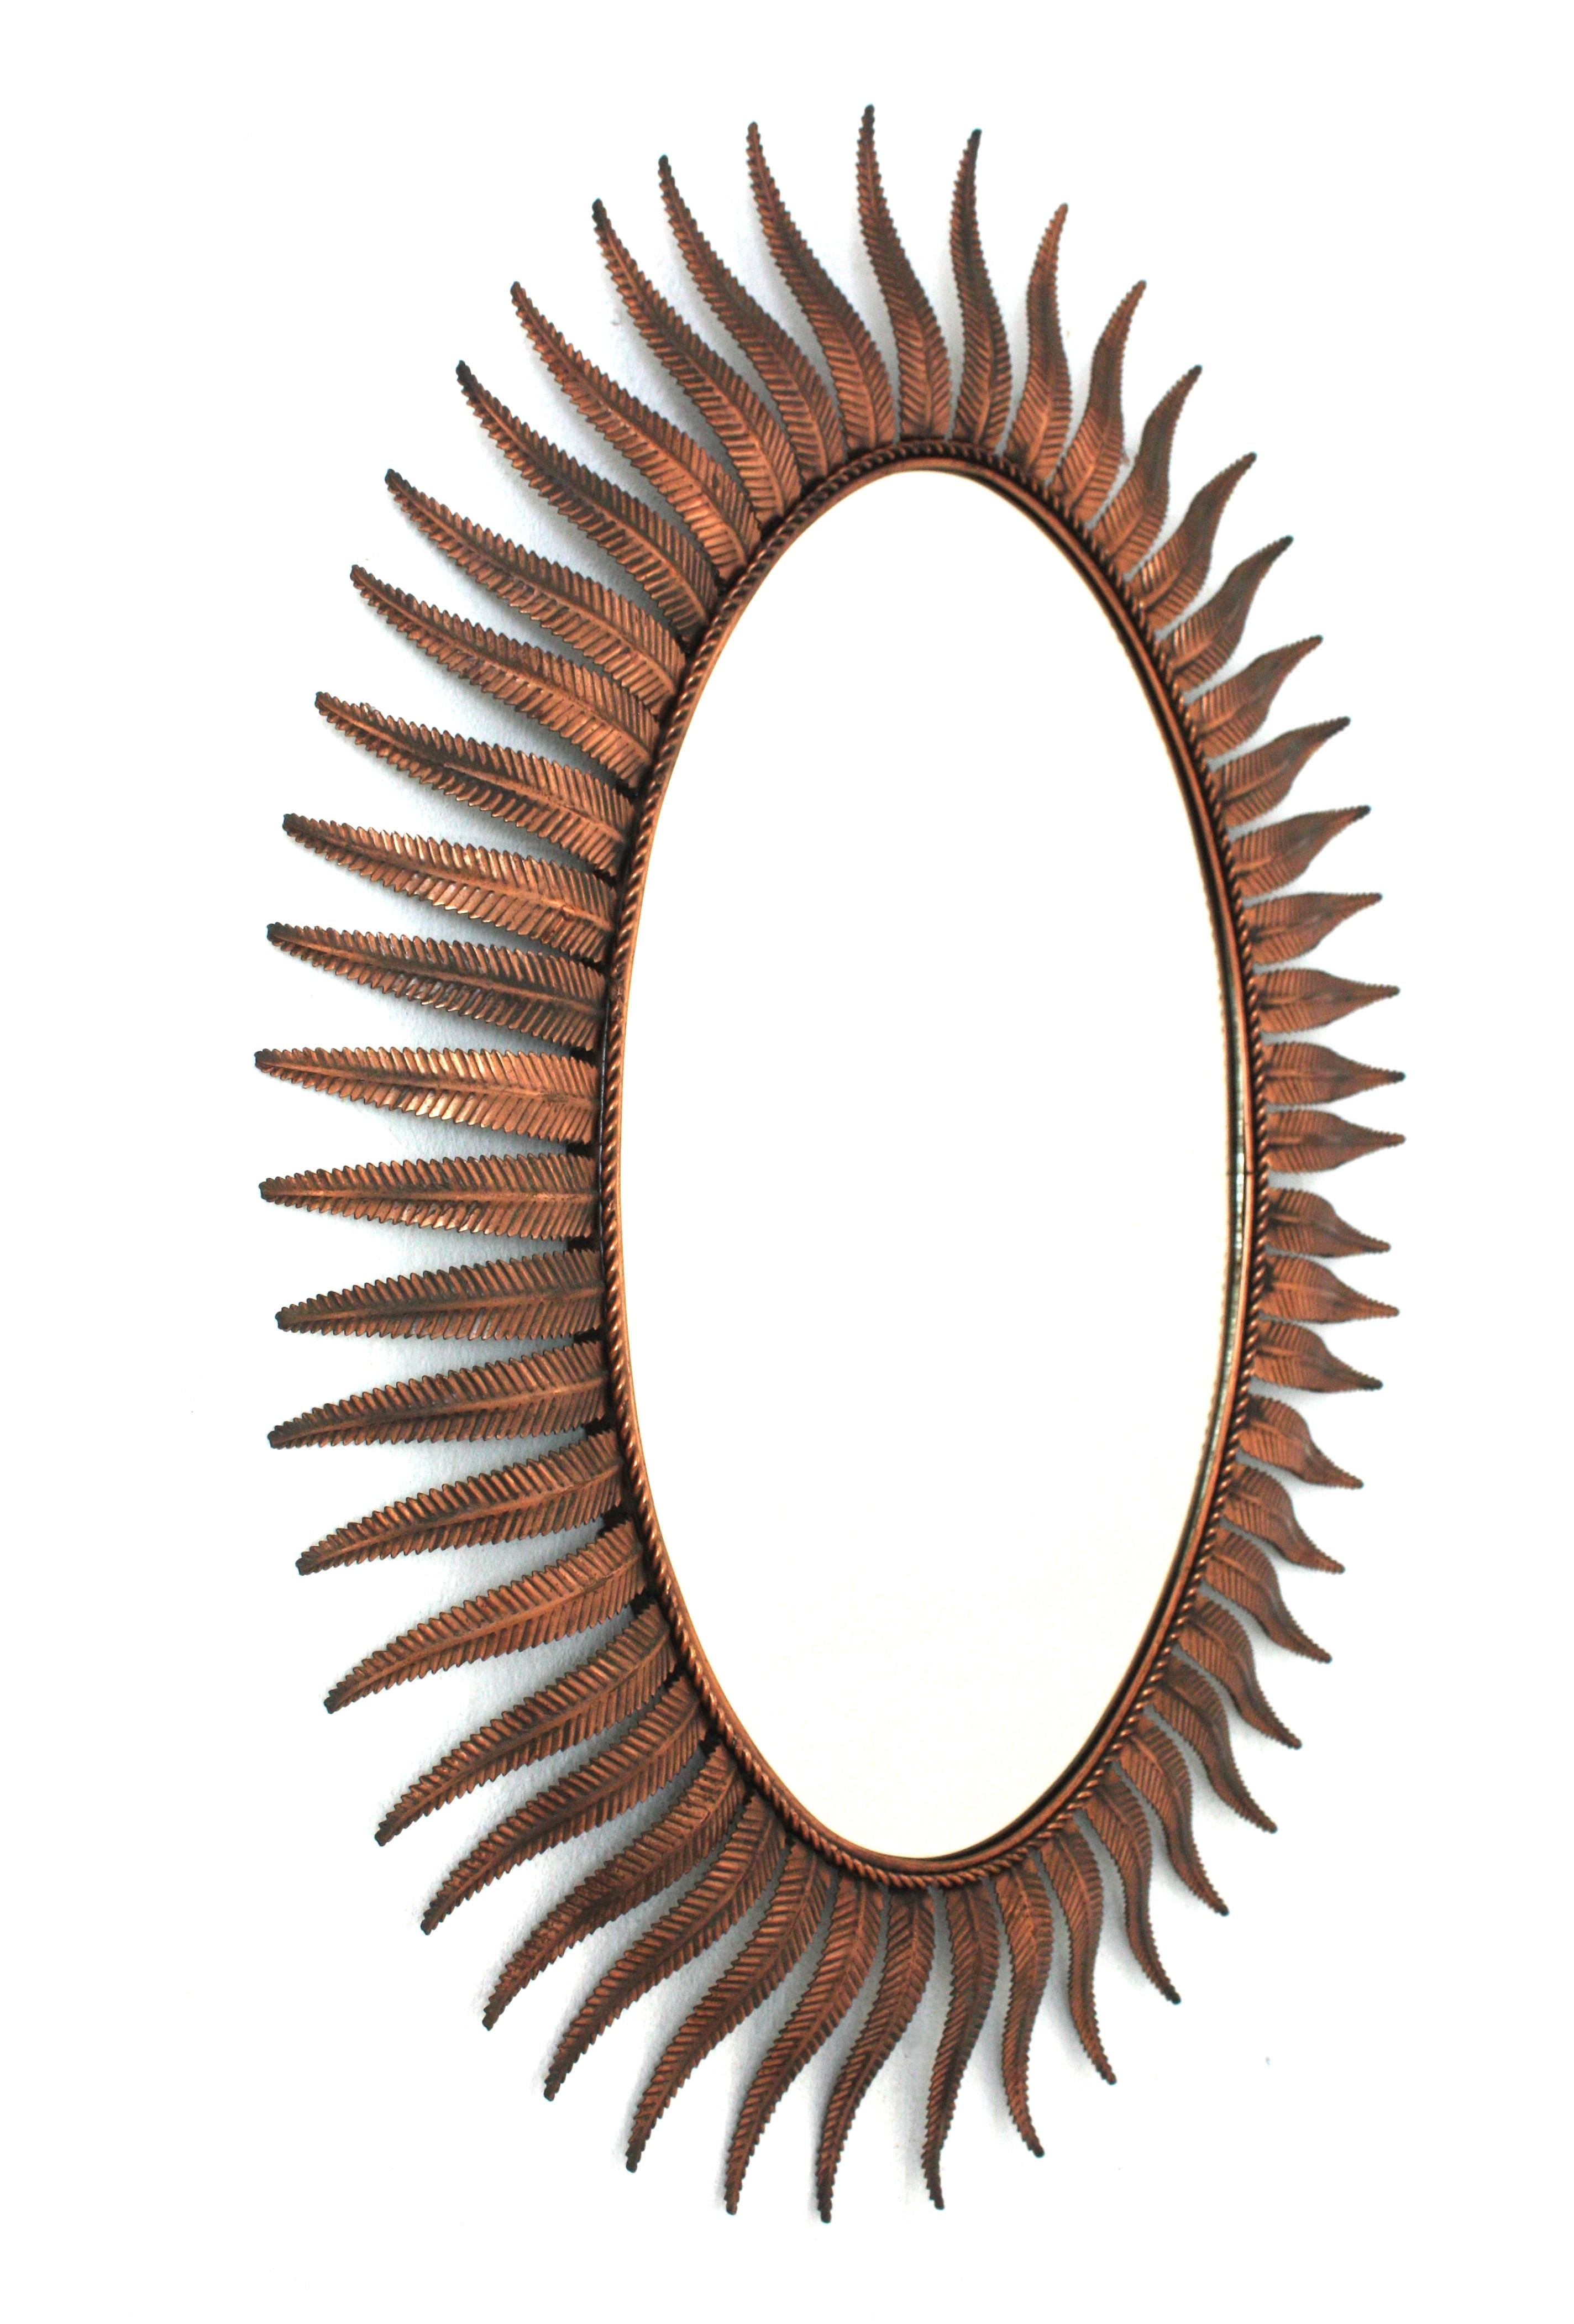 Hammered Spanish Sunburst Oval Mirror in Copper Metal, 1950s For Sale